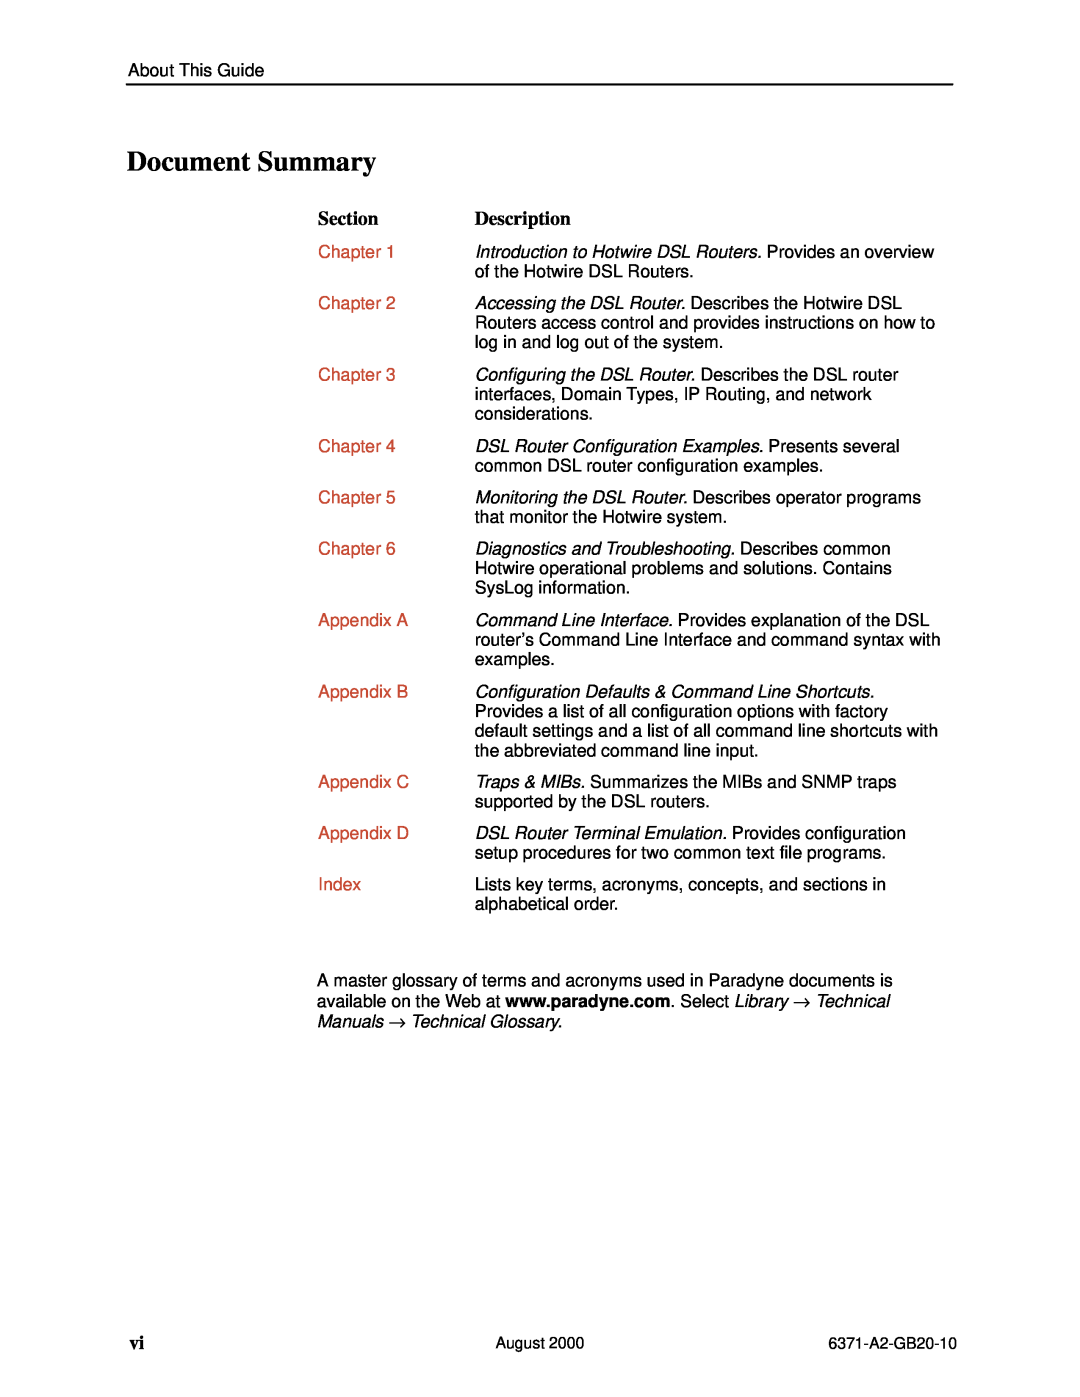 Paradyne Routers Document Summary, Chapter, Appendix A, Appendix B, Appendix C, Appendix D, Index, Section, Description 